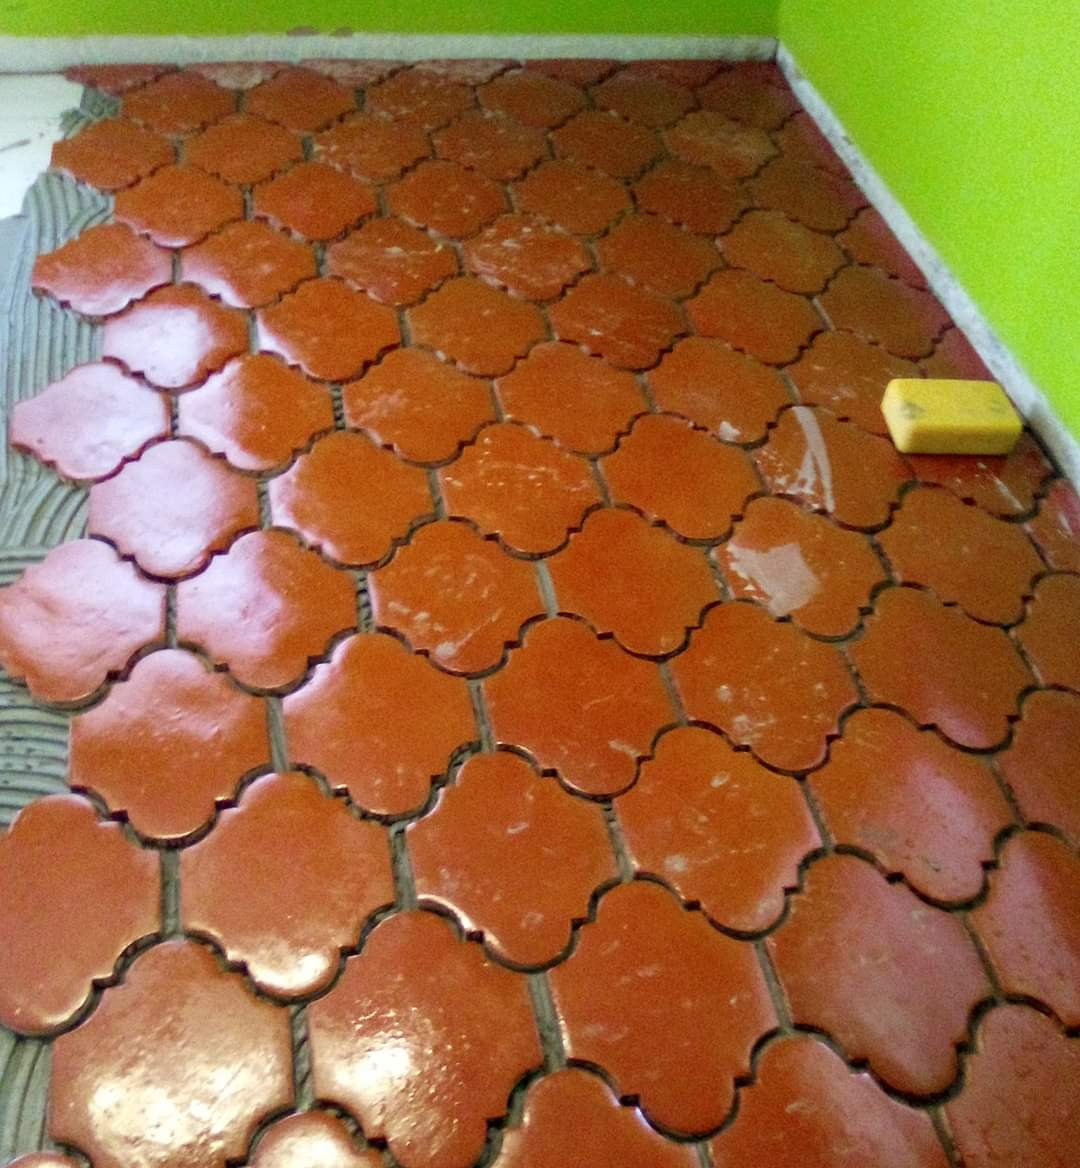 A traditional ceramic tile floor is being installed in this small Portuguese restaurant.